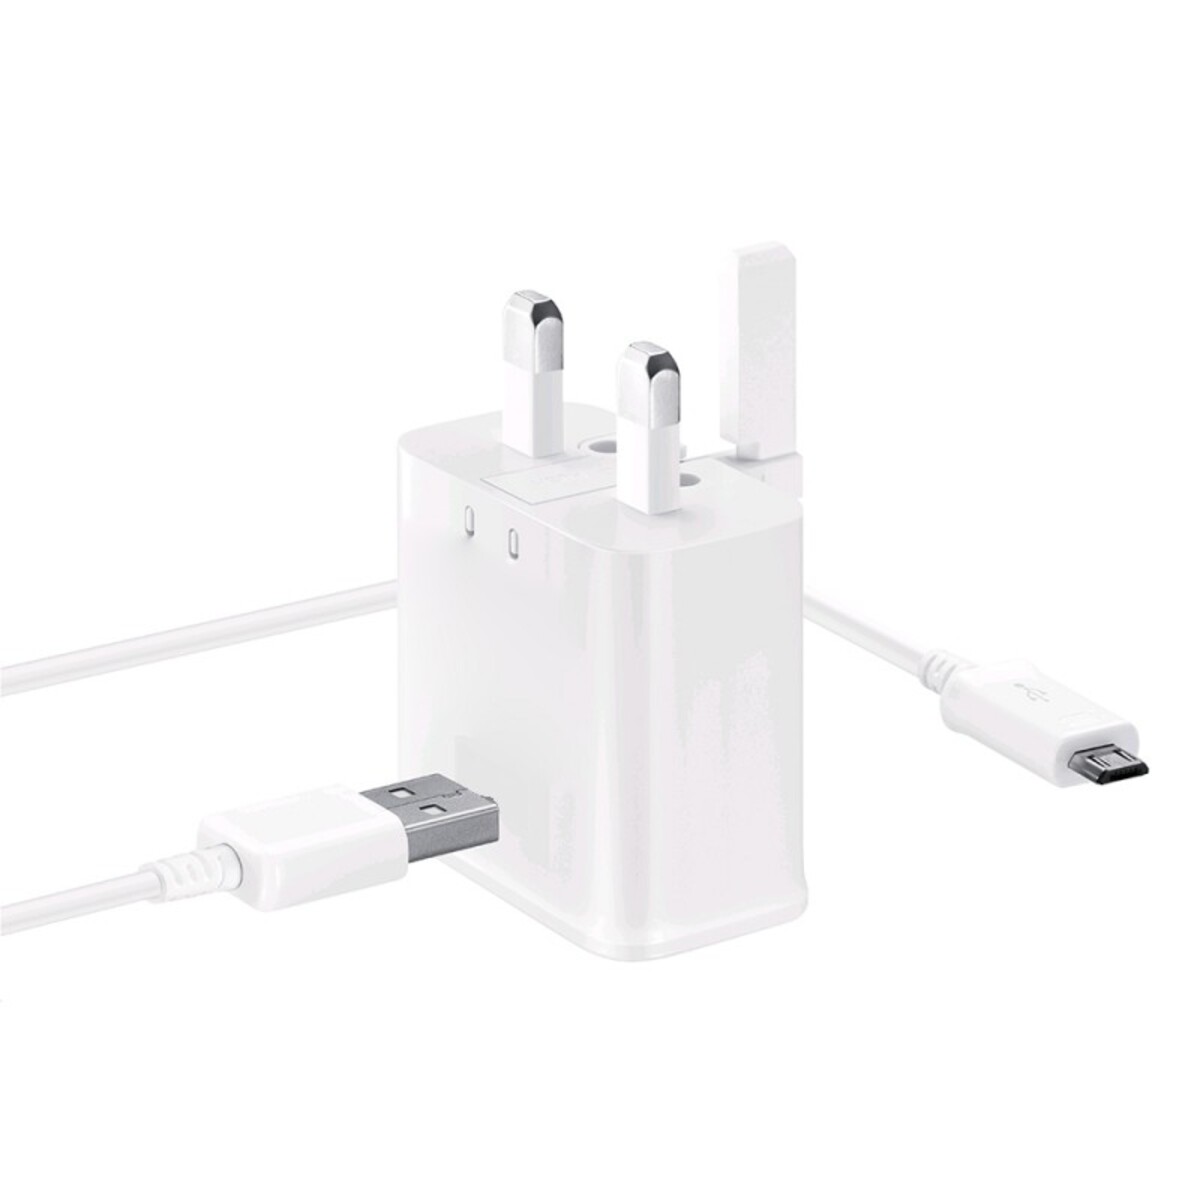 Trands Micro USB Travel Charger TR-35